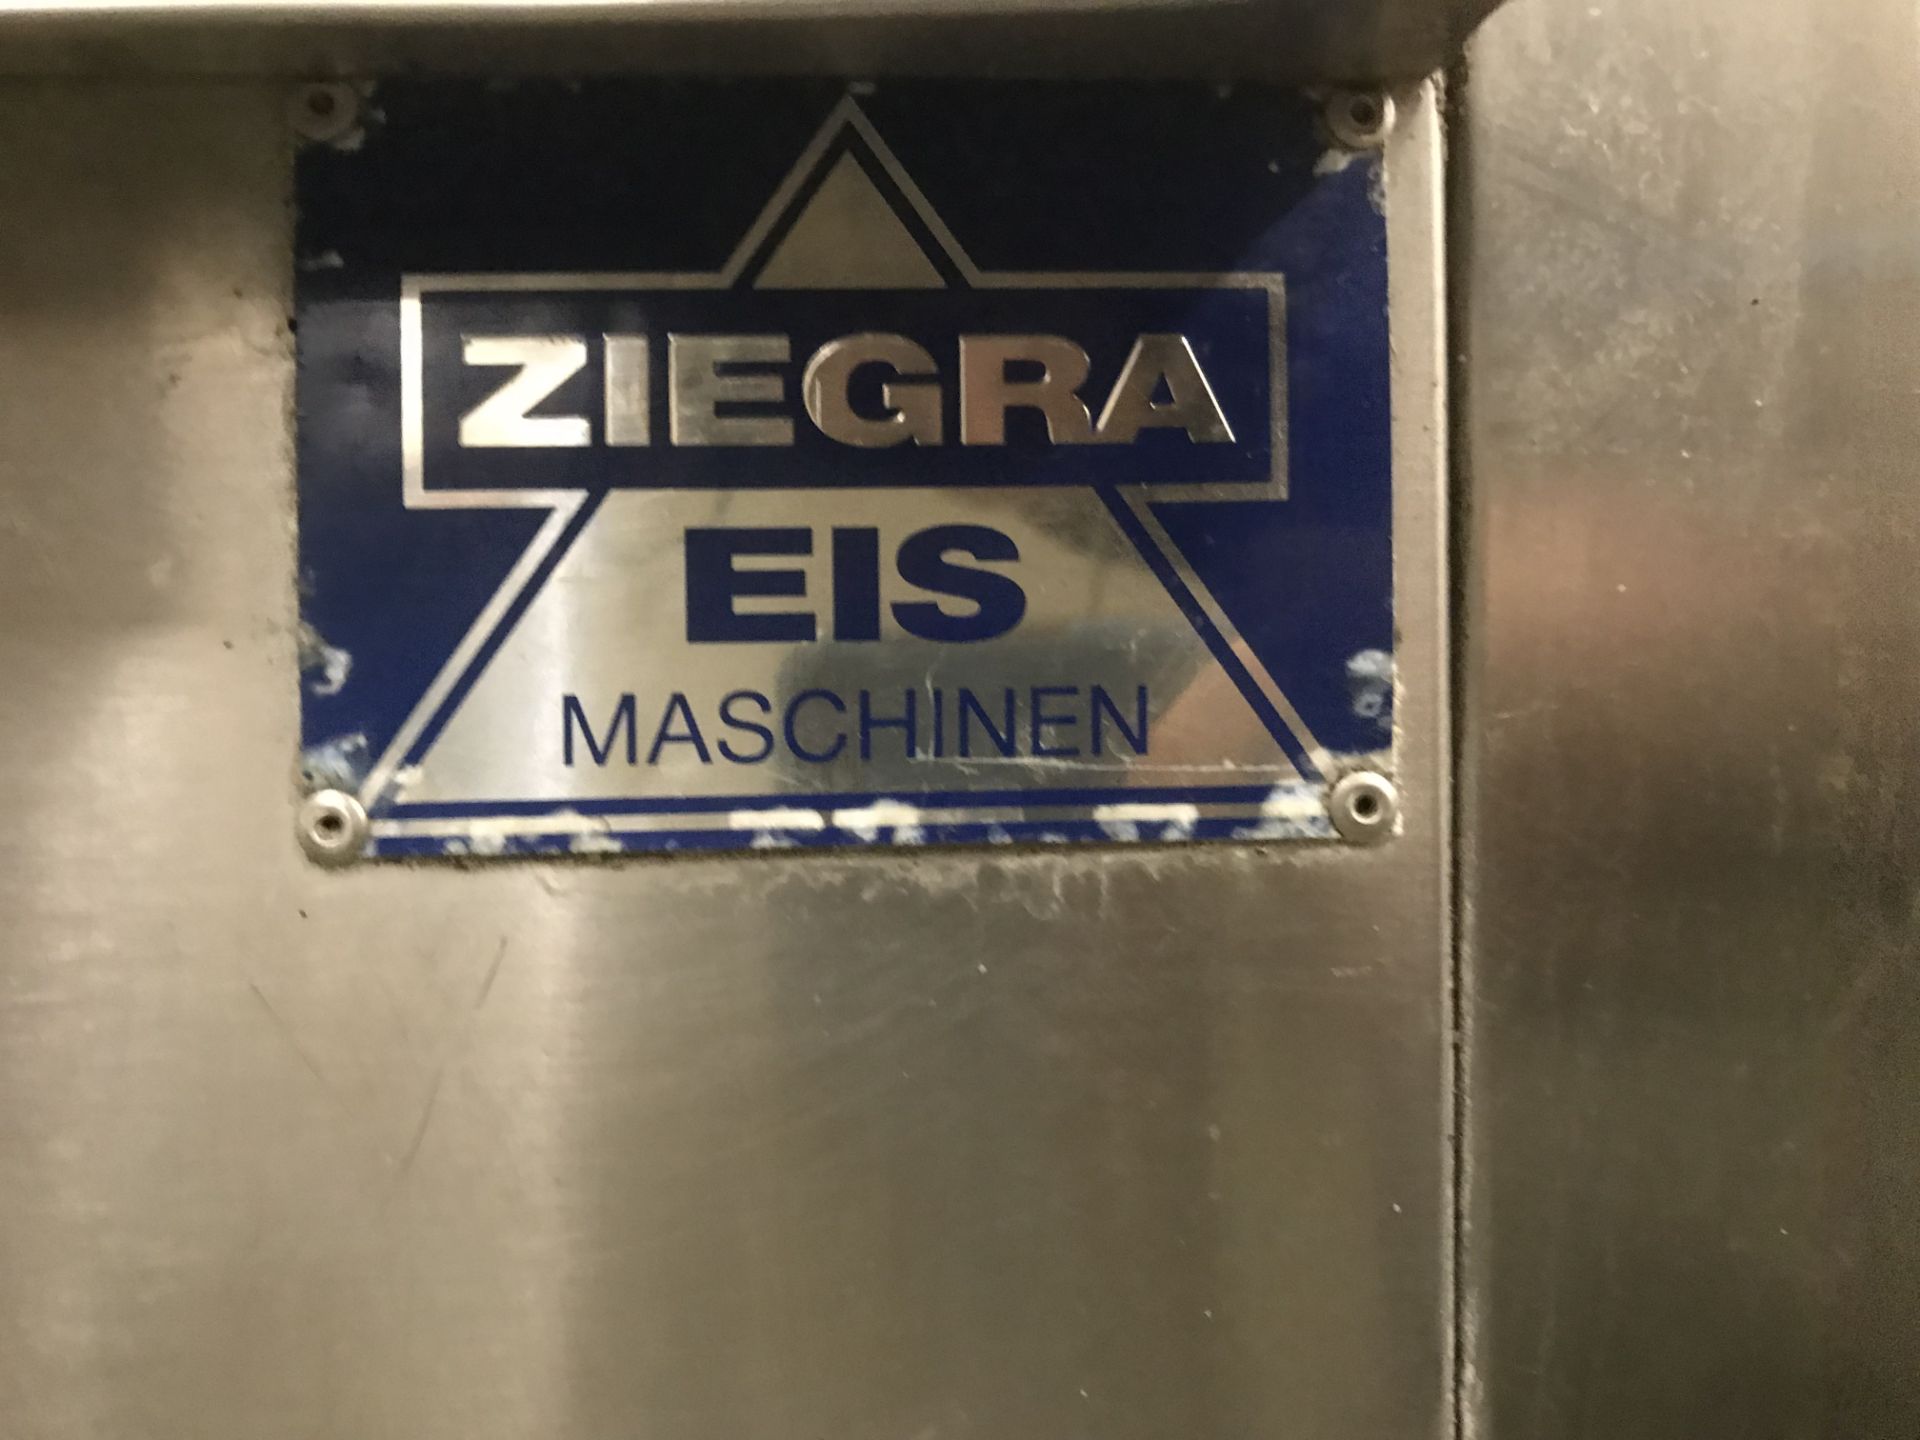 Ziegra Stainless Steel Ice Machine | Missing Top Panel - Image 2 of 2